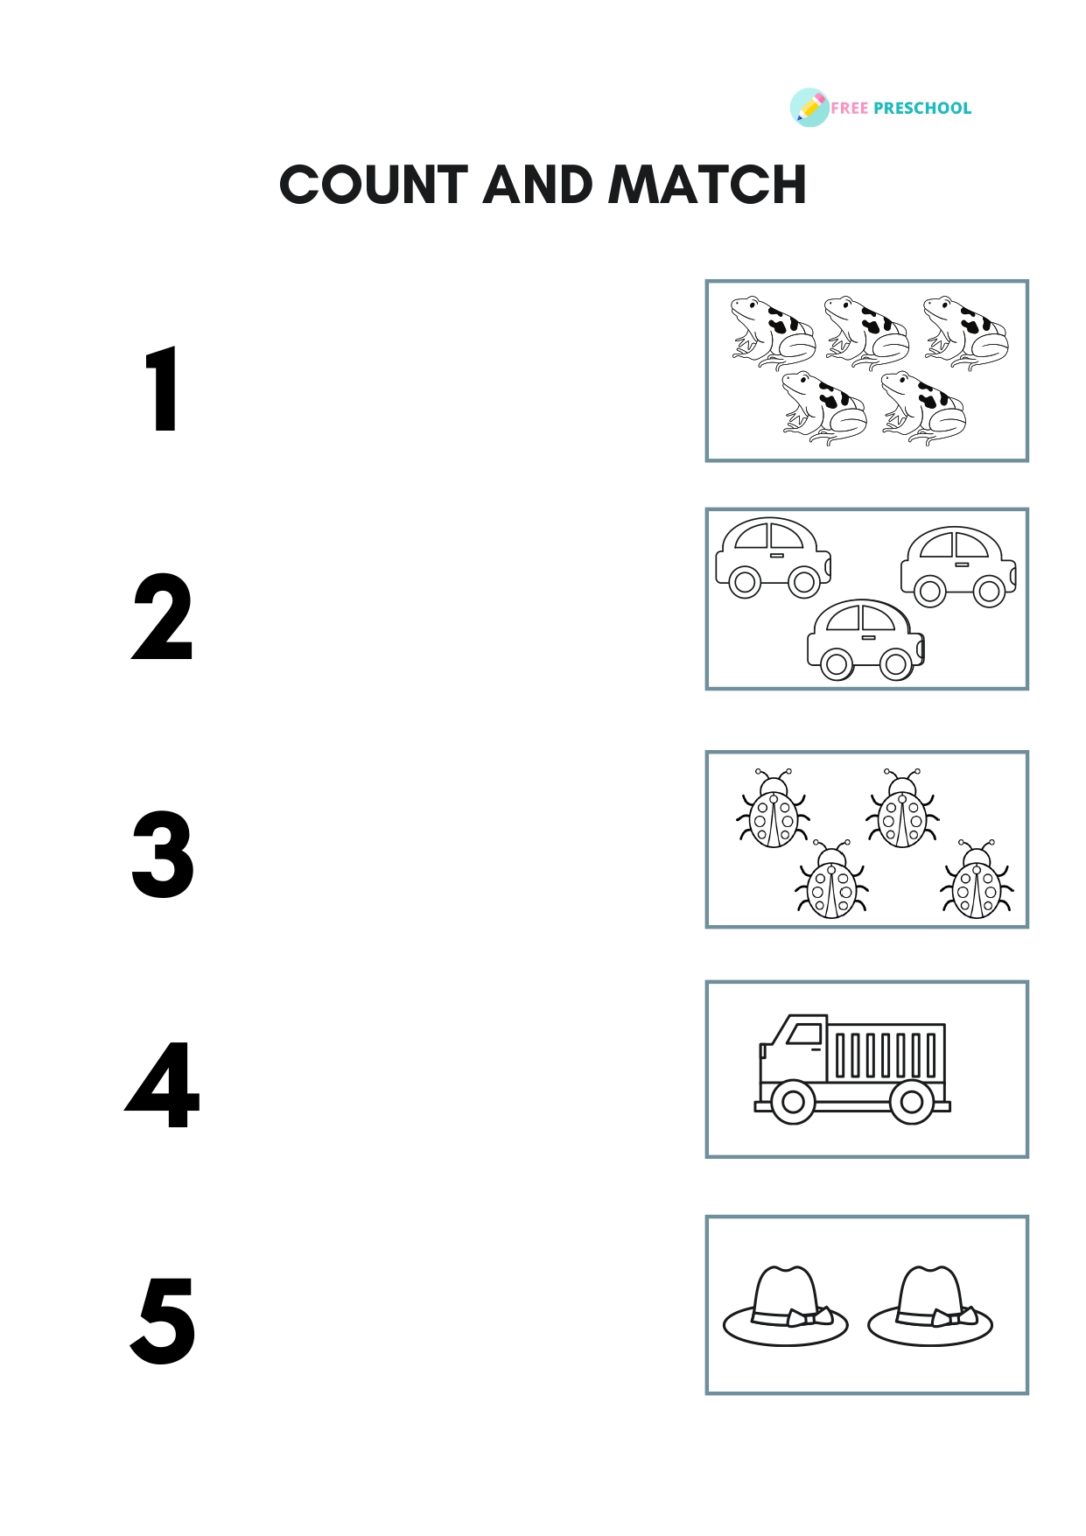 number-count-and-match-worksheets-for-preschool-free-preschool